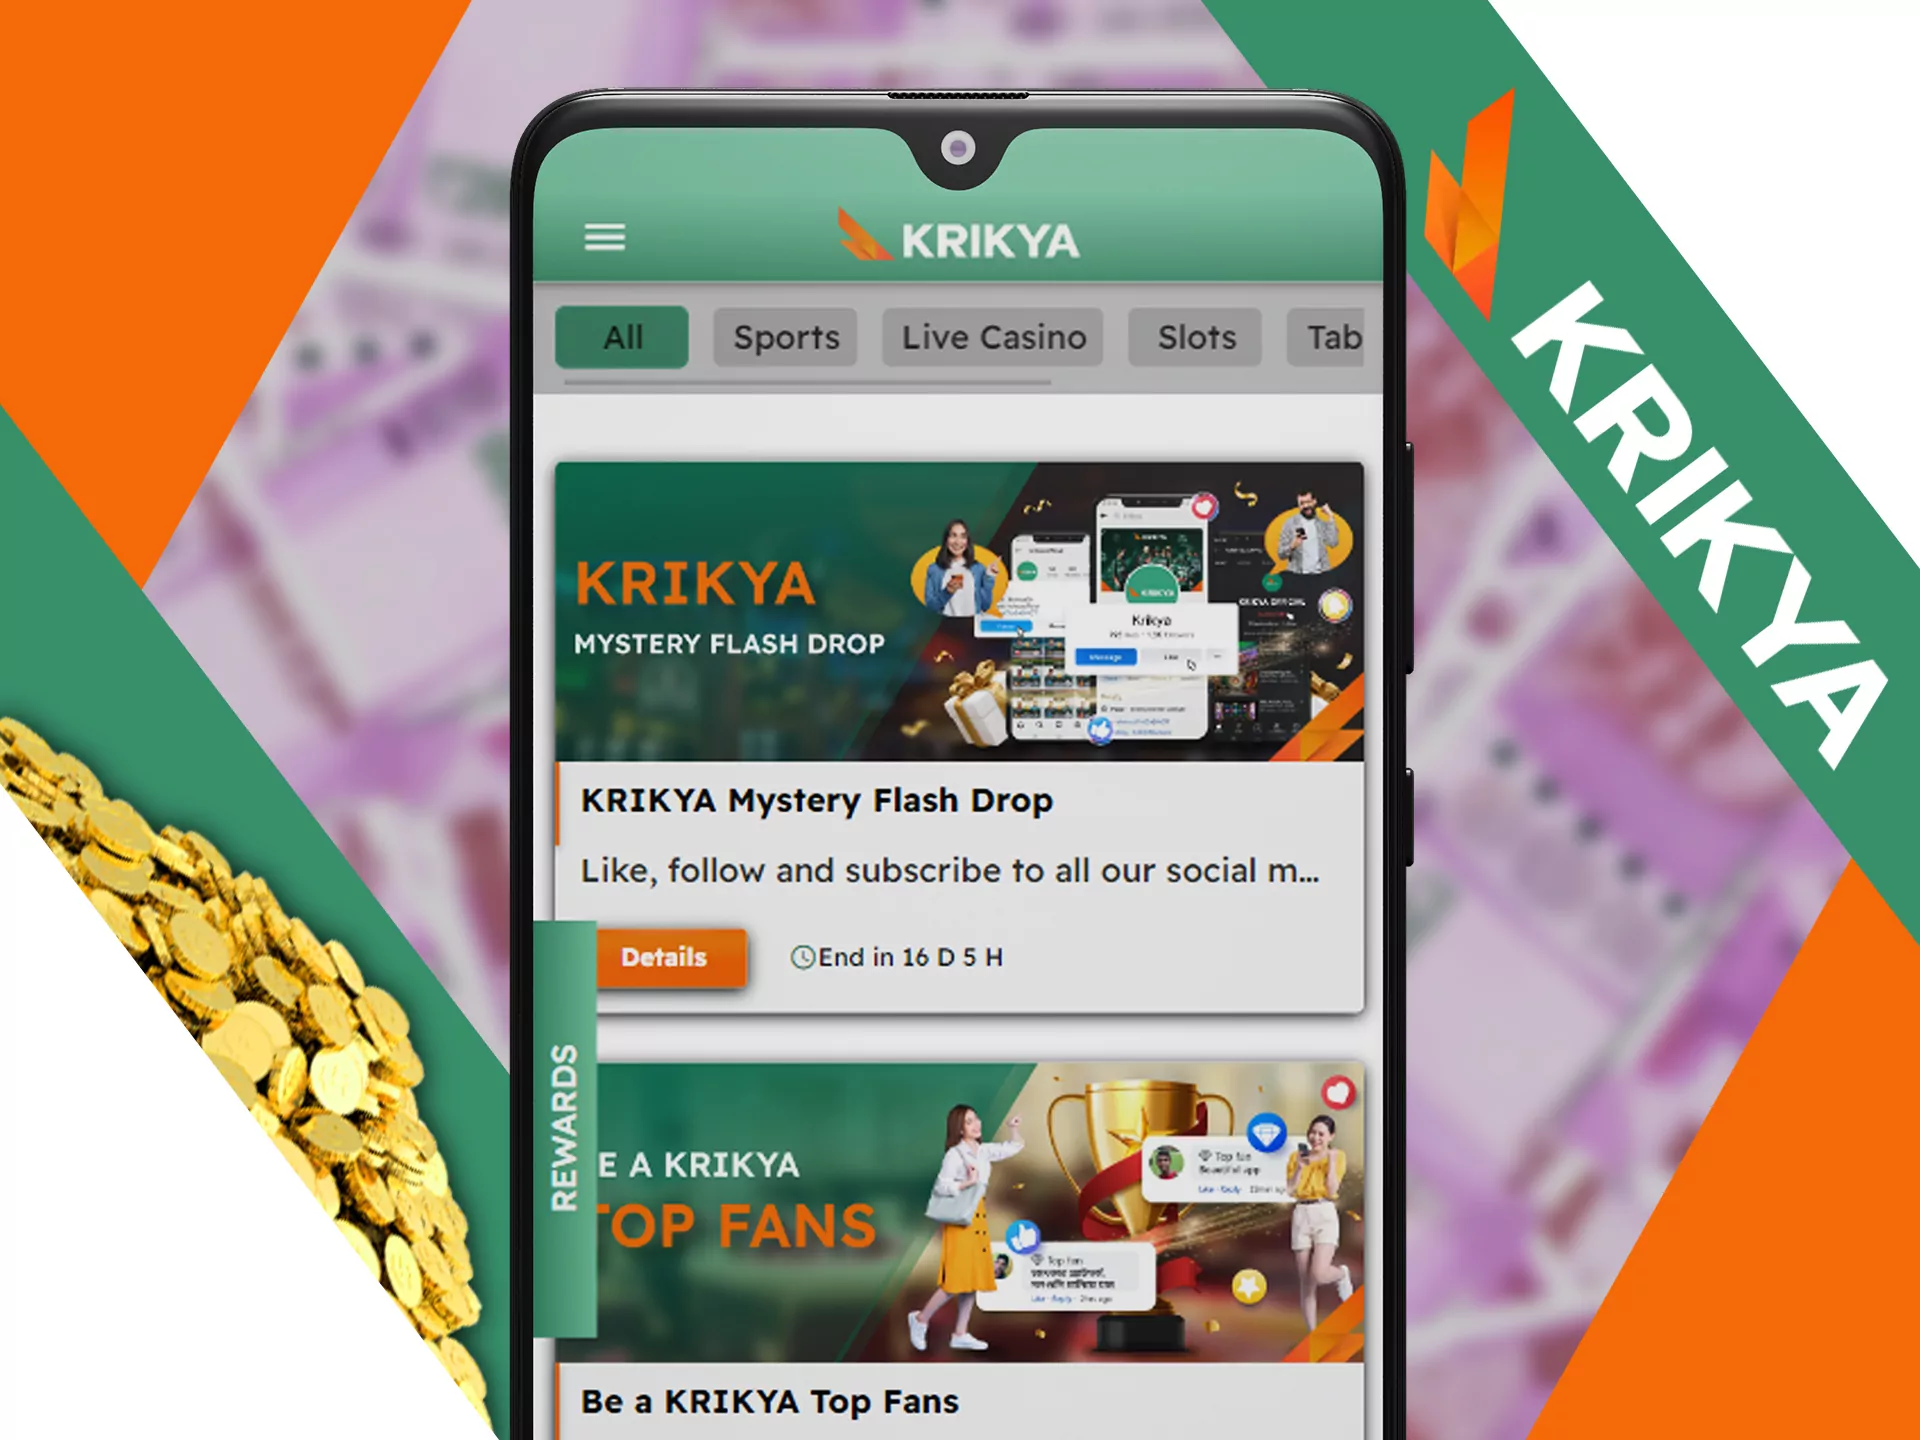 Get benefits from all of the Krikya bonuses.